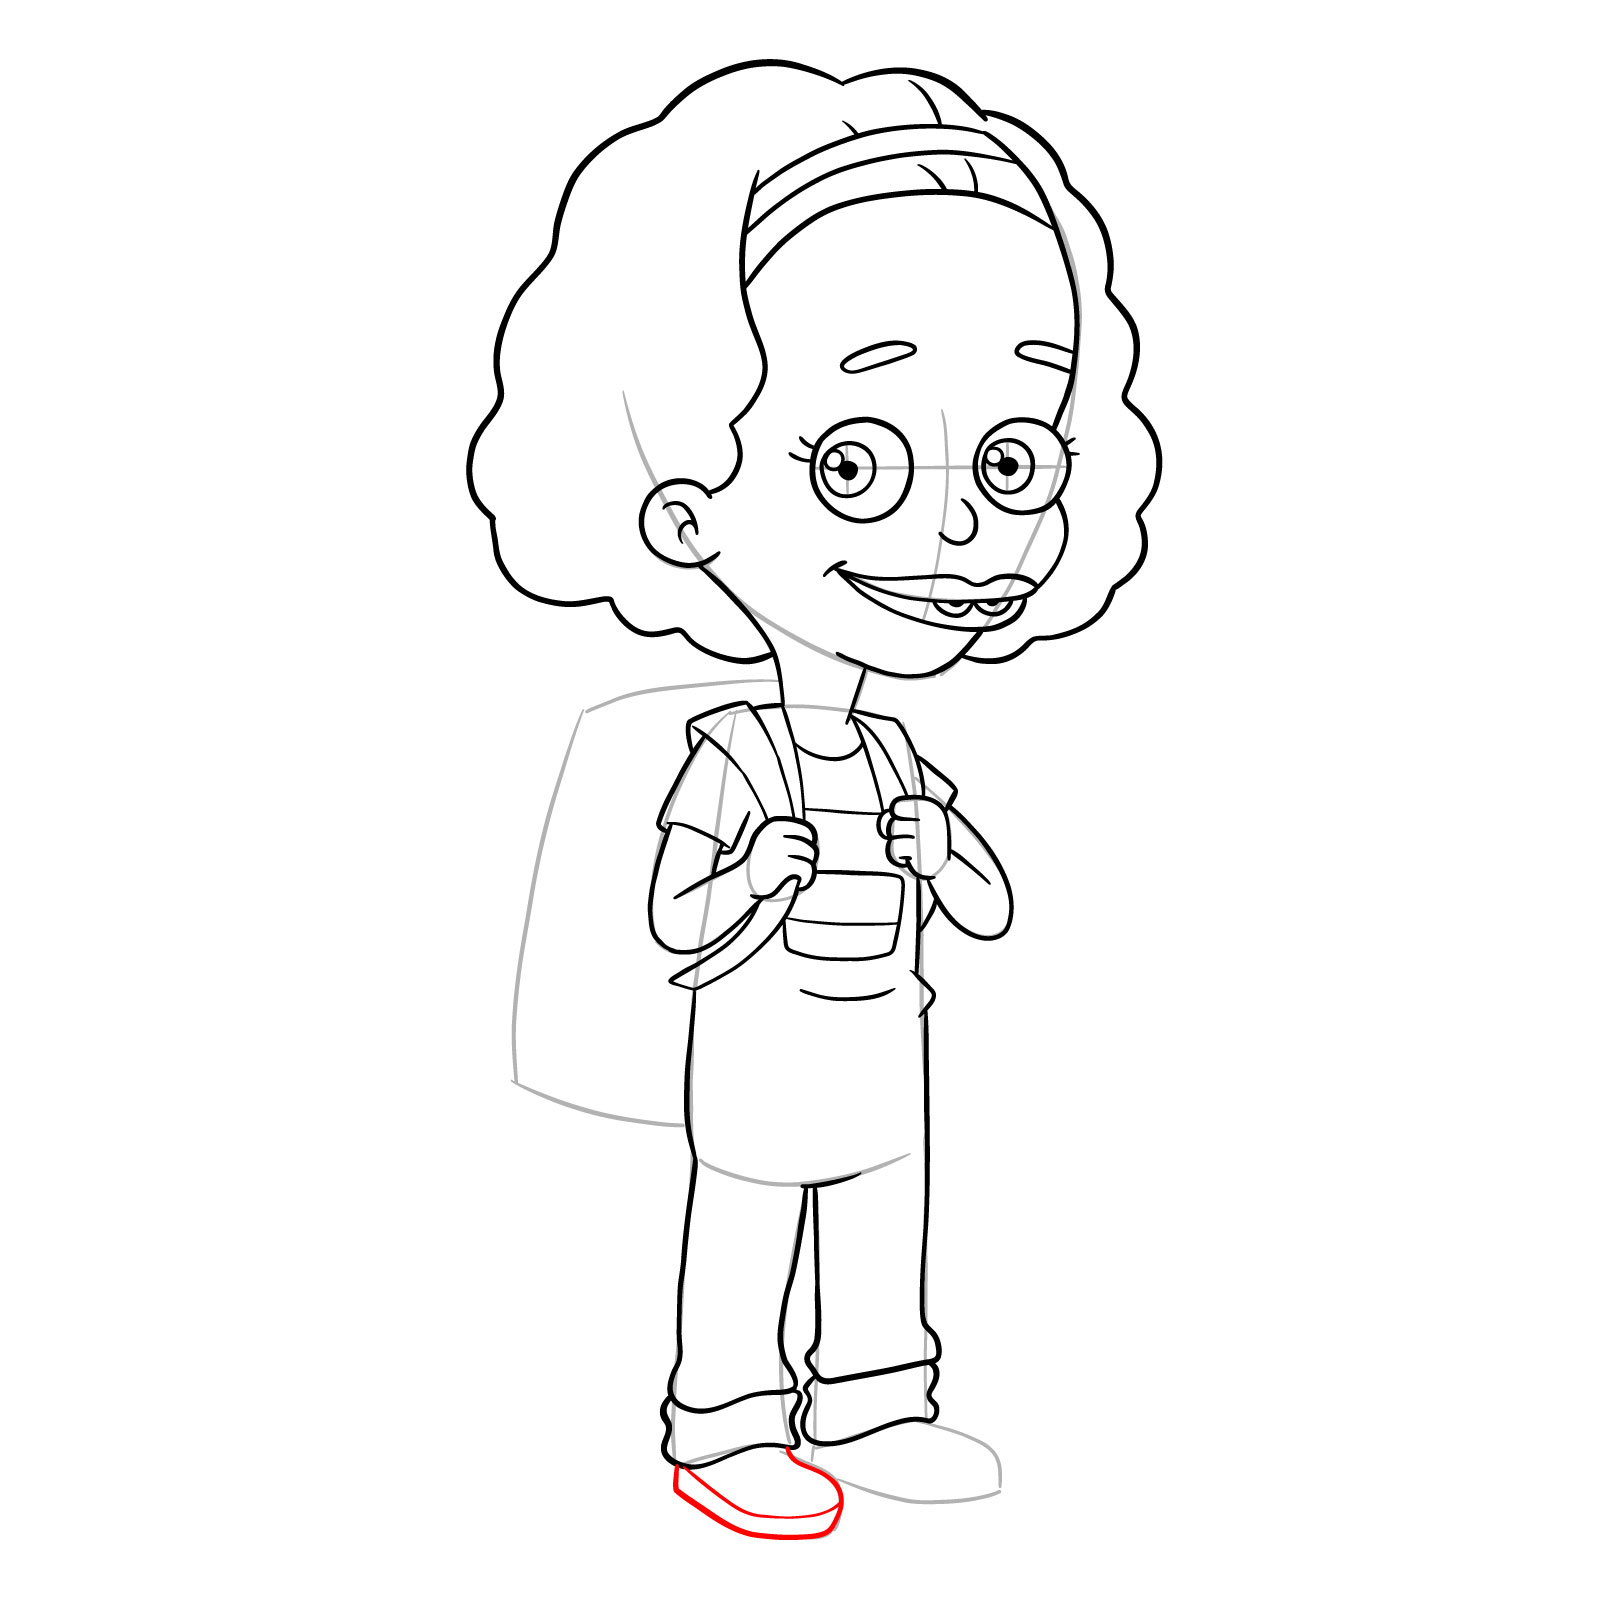 How to draw Missy from Big Mouth - step 25